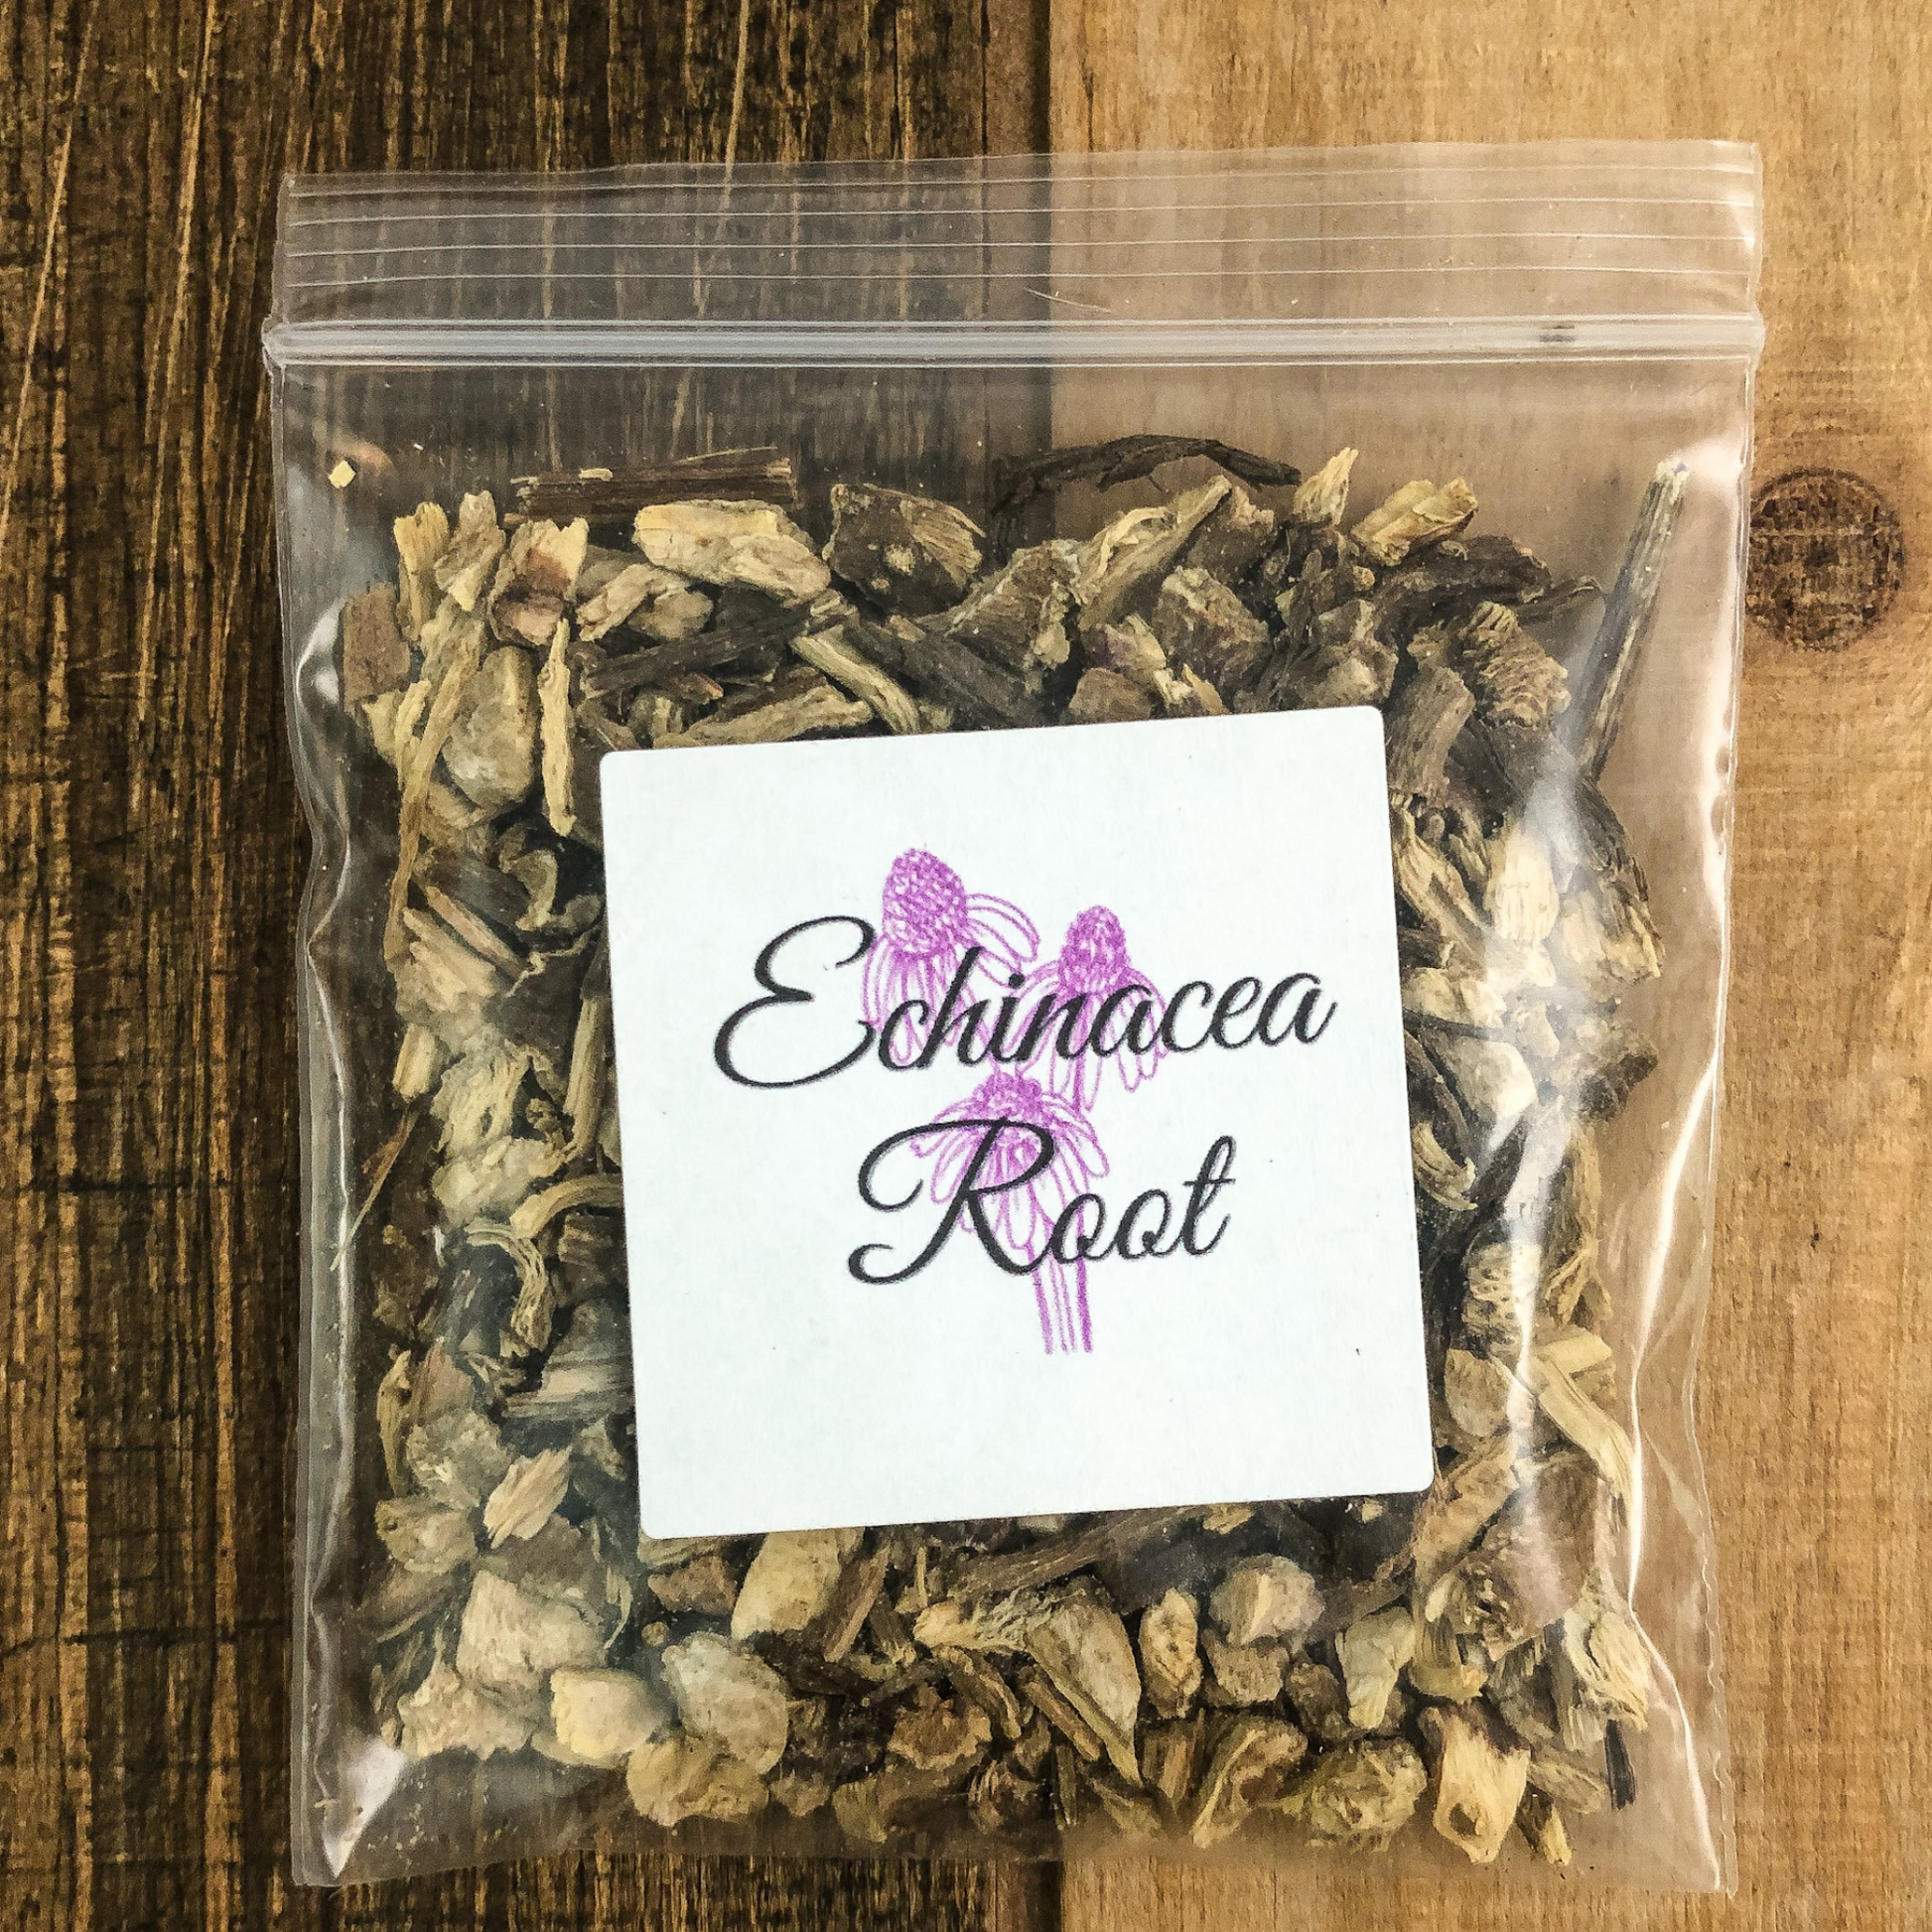 8g bag of dried echinacea root in a clear plastic bag with a wooden background